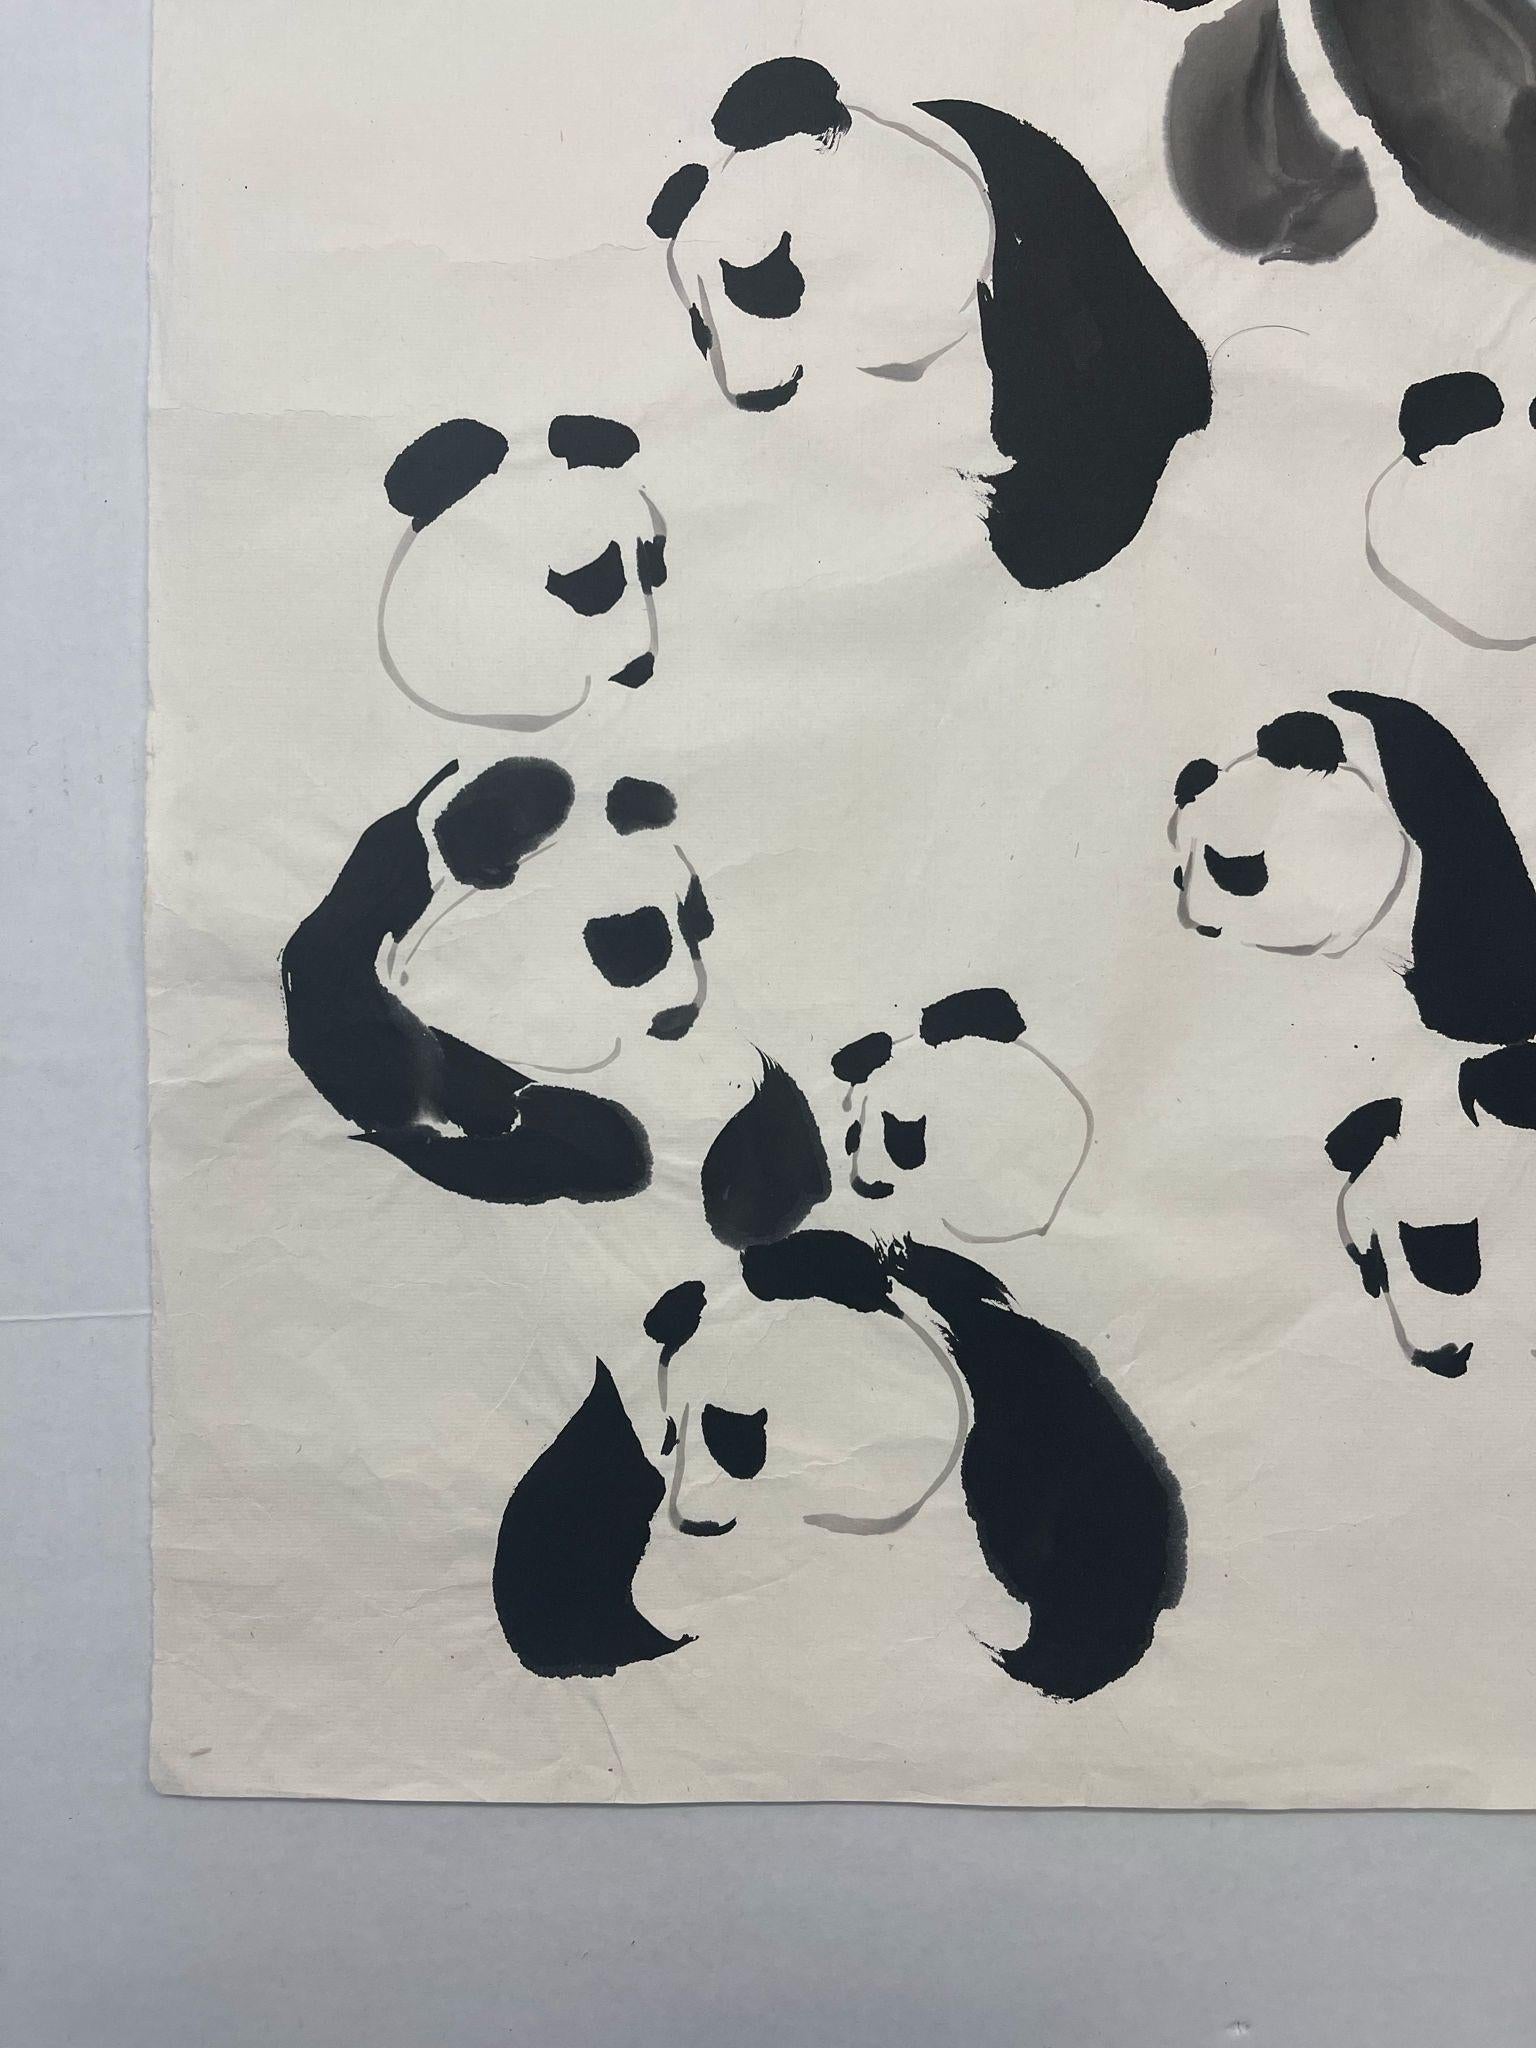 Late 20th Century Vintage Signed Original Watercolor Painting of Panda Bear Study. For Sale